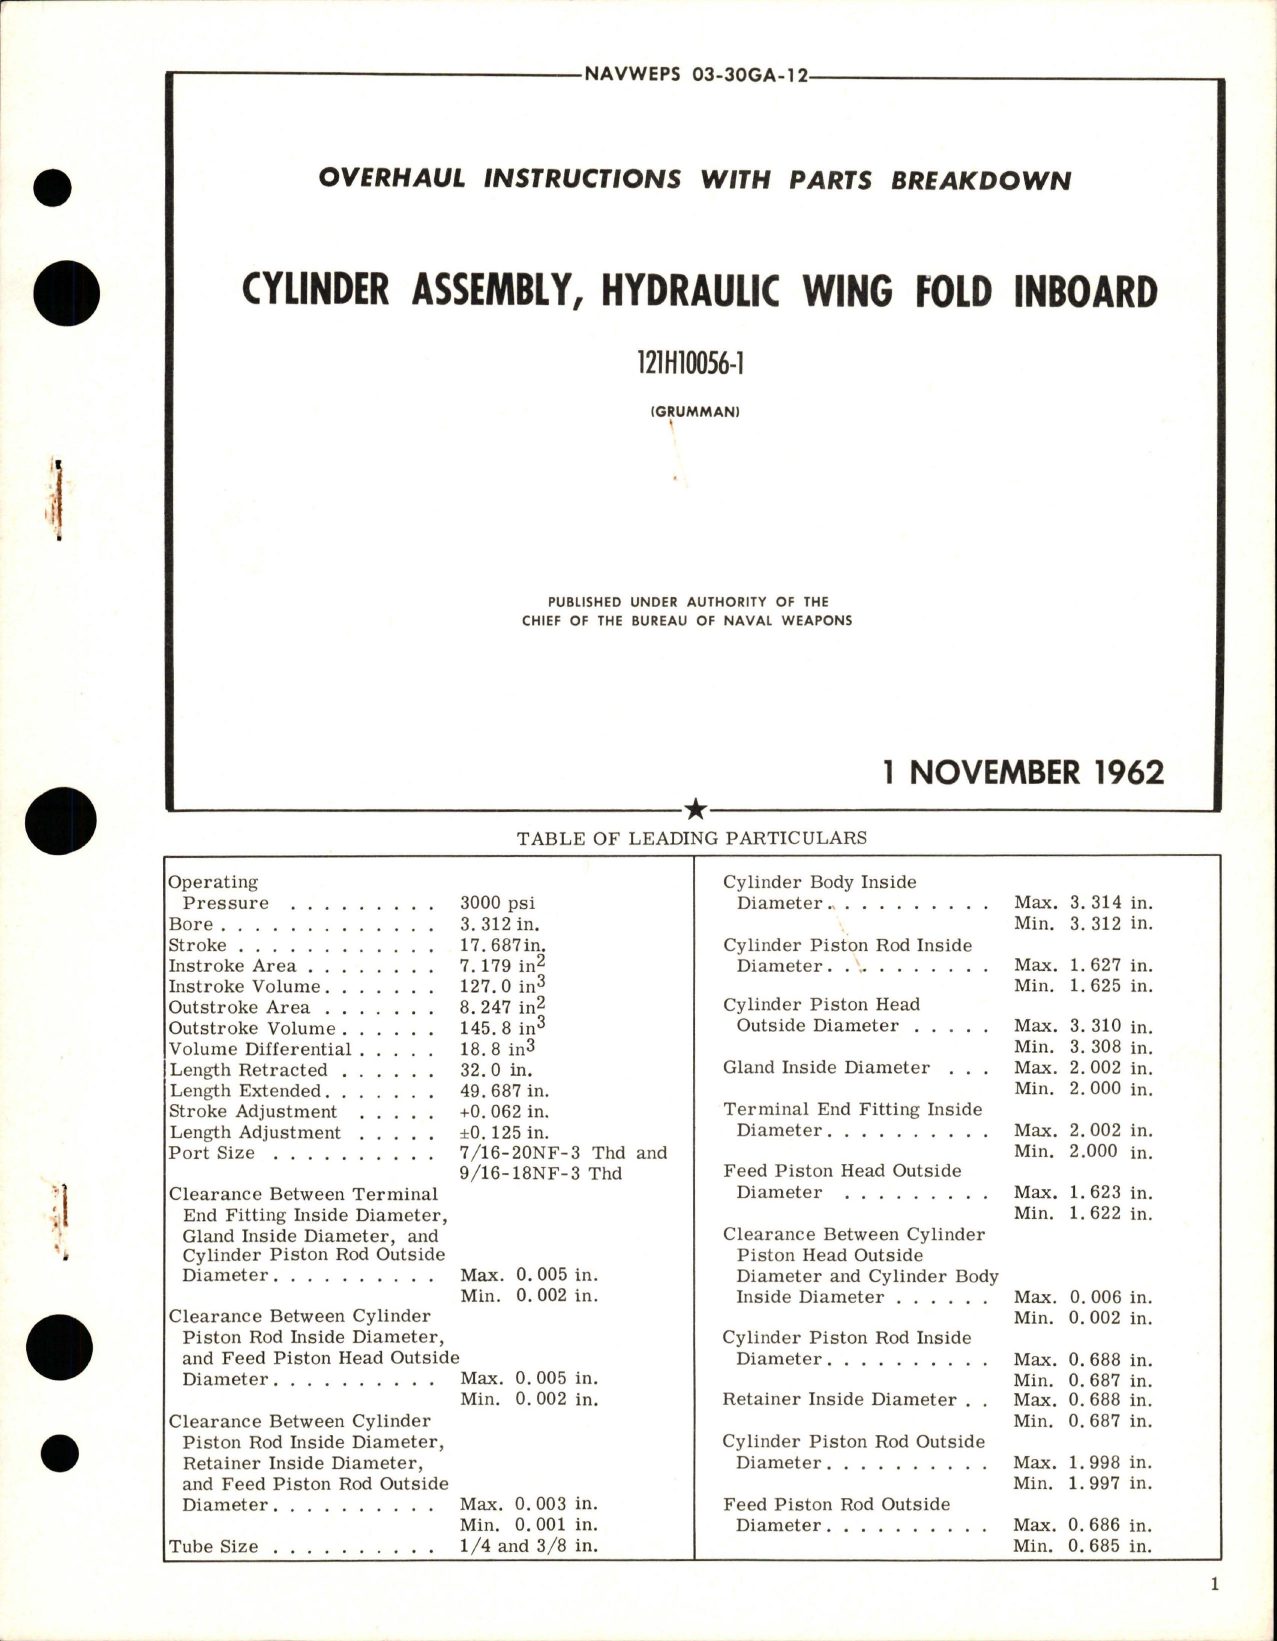 Sample page 1 from AirCorps Library document: Overhaul Instructions with Parts Breakdown for Hydraulic Wing Fold Inboard Cylinder Assembly - 121H10056-1